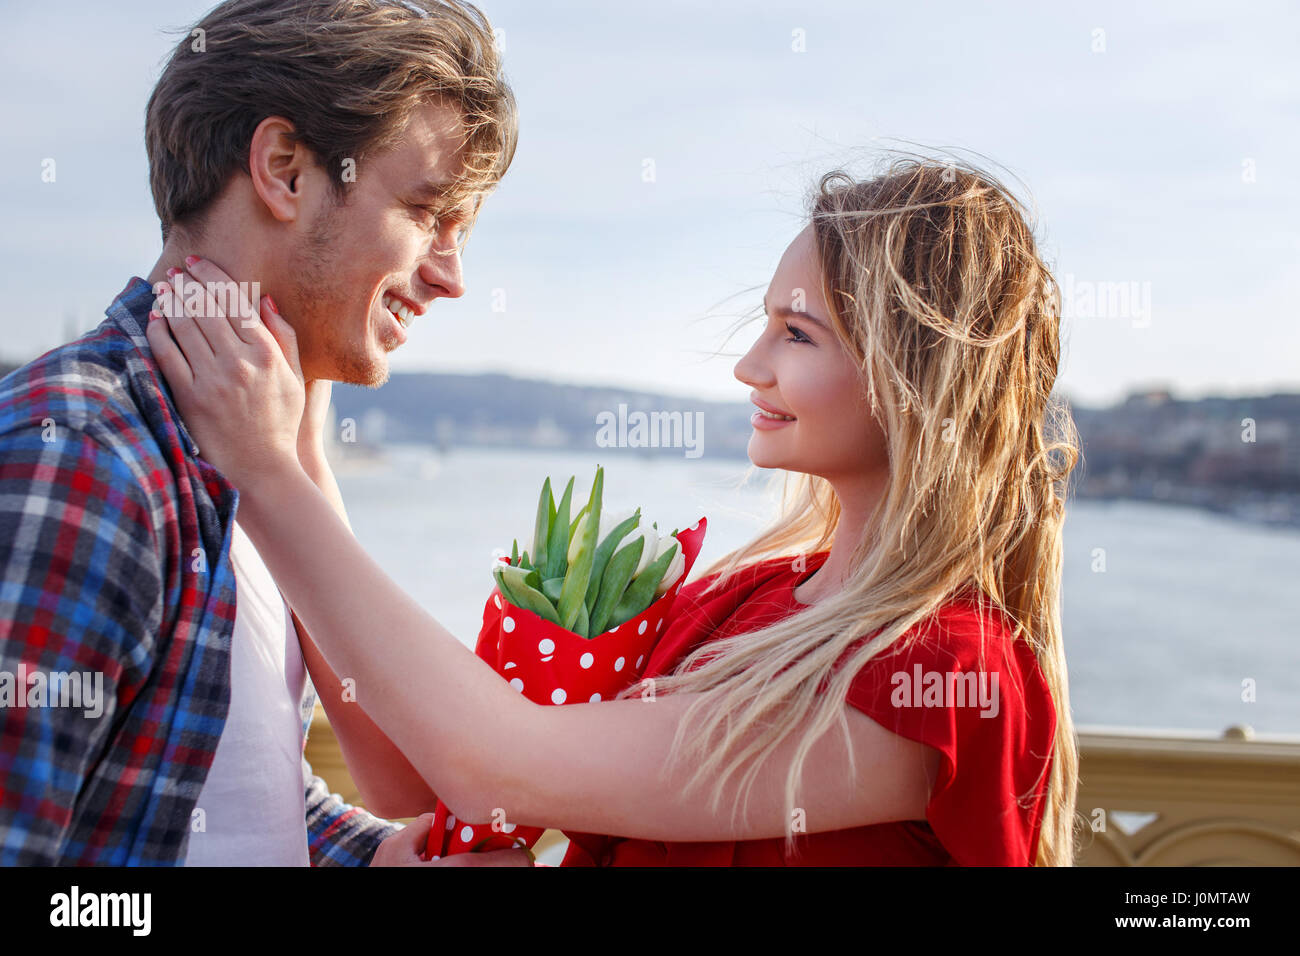 Young woman got bouquet on dating from man on bridge over the river Stock Photo